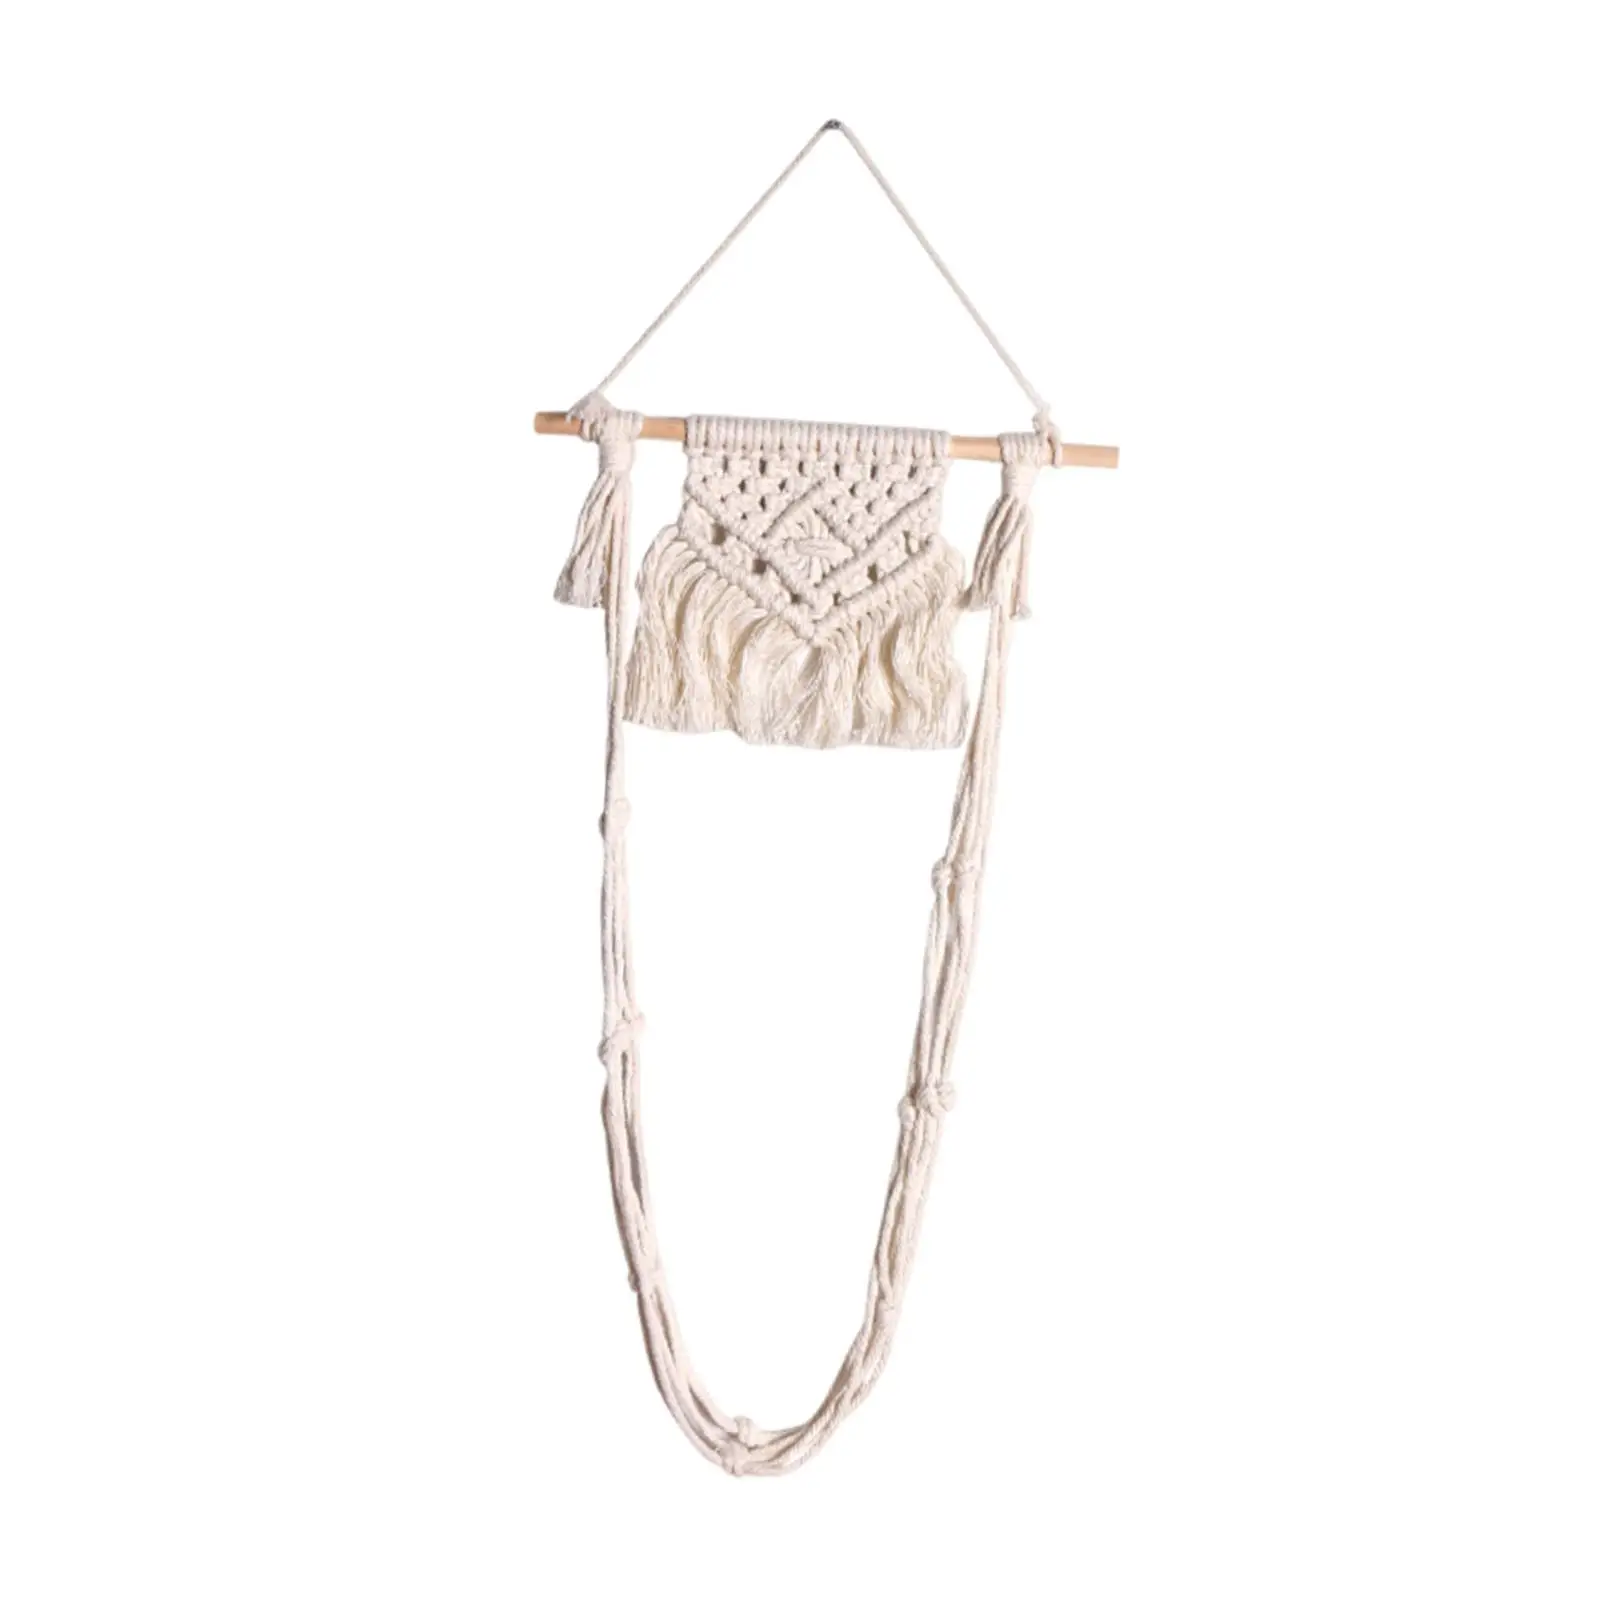 Paper Roll Holder Wooden Macrame Wall Mounted Toilet Paper Holder for Farmhouse